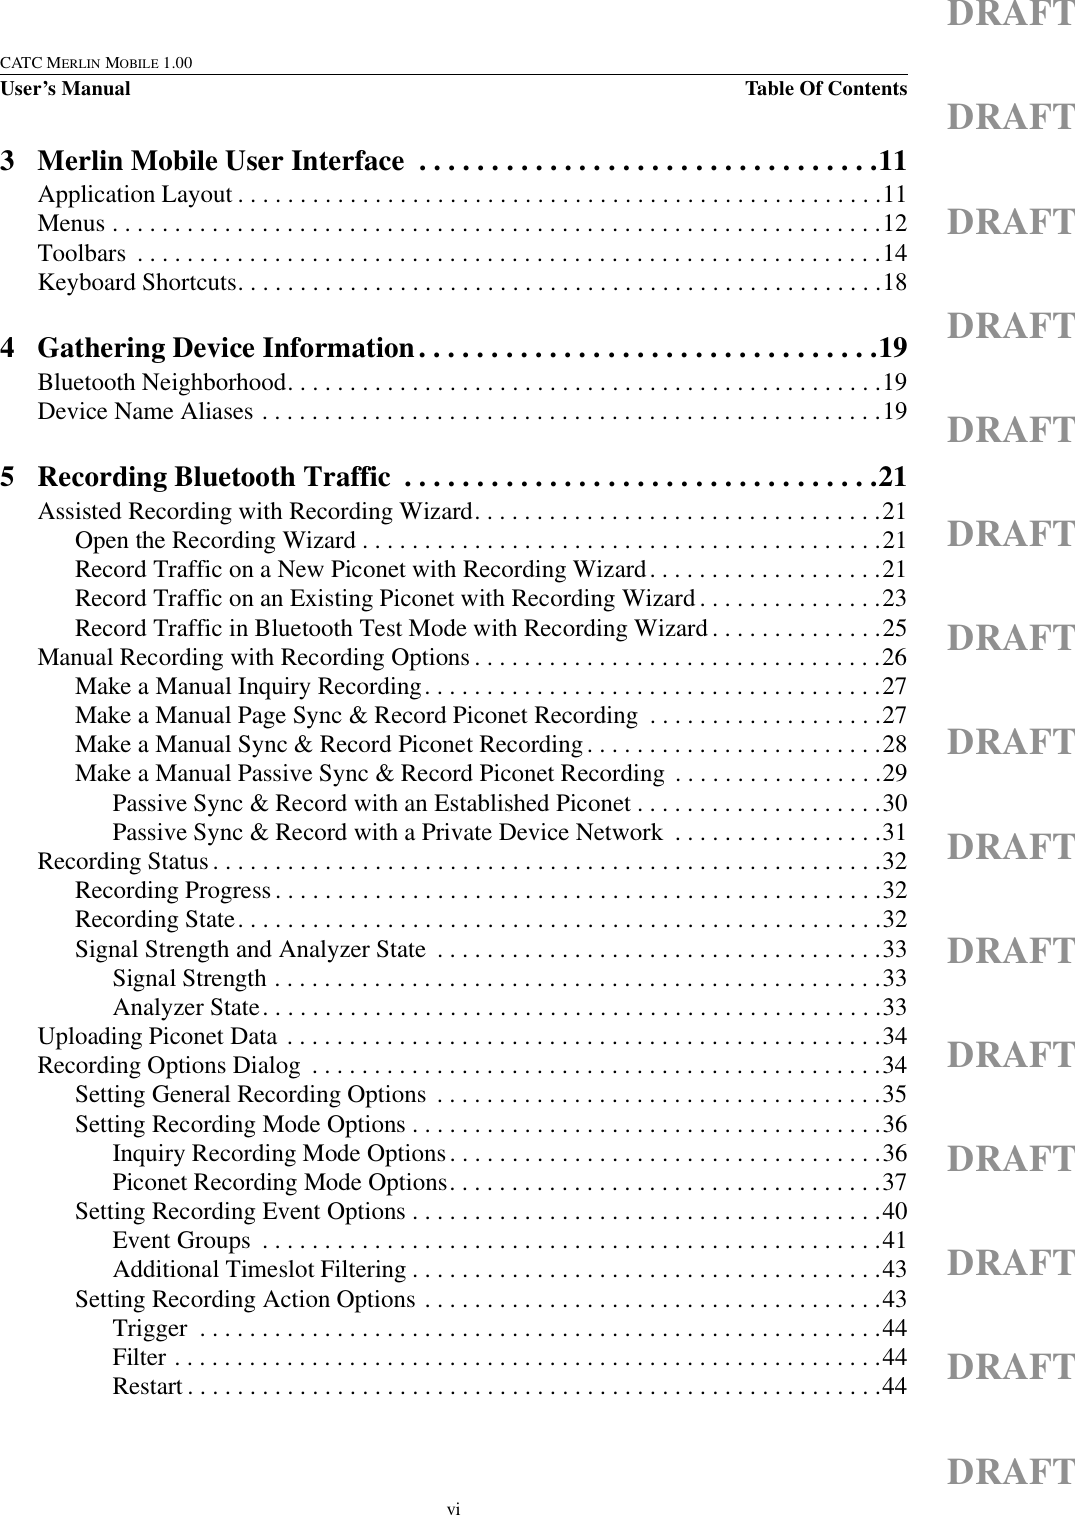 viCATC MERLIN MOBILE 1.00User’s Manual Table Of ContentsDRAFTDRAFTDRAFTDRAFTDRAFTDRAFTDRAFTDRAFTDRAFTDRAFTDRAFTDRAFTDRAFTDRAFTDRAFT3 Merlin Mobile User Interface  . . . . . . . . . . . . . . . . . . . . . . . . . . . . . . . .11Application Layout . . . . . . . . . . . . . . . . . . . . . . . . . . . . . . . . . . . . . . . . . . . . . . . . . . . .11Menus . . . . . . . . . . . . . . . . . . . . . . . . . . . . . . . . . . . . . . . . . . . . . . . . . . . . . . . . . . . . . .12Toolbars  . . . . . . . . . . . . . . . . . . . . . . . . . . . . . . . . . . . . . . . . . . . . . . . . . . . . . . . . . . . .14Keyboard Shortcuts. . . . . . . . . . . . . . . . . . . . . . . . . . . . . . . . . . . . . . . . . . . . . . . . . . . .184 Gathering Device Information. . . . . . . . . . . . . . . . . . . . . . . . . . . . . . . .19Bluetooth Neighborhood. . . . . . . . . . . . . . . . . . . . . . . . . . . . . . . . . . . . . . . . . . . . . . . .19Device Name Aliases . . . . . . . . . . . . . . . . . . . . . . . . . . . . . . . . . . . . . . . . . . . . . . . . . .195 Recording Bluetooth Traffic  . . . . . . . . . . . . . . . . . . . . . . . . . . . . . . . . .21Assisted Recording with Recording Wizard. . . . . . . . . . . . . . . . . . . . . . . . . . . . . . . . .21Open the Recording Wizard . . . . . . . . . . . . . . . . . . . . . . . . . . . . . . . . . . . . . . . . . .21Record Traffic on a New Piconet with Recording Wizard. . . . . . . . . . . . . . . . . . .21Record Traffic on an Existing Piconet with Recording Wizard . . . . . . . . . . . . . . .23Record Traffic in Bluetooth Test Mode with Recording Wizard . . . . . . . . . . . . . .25Manual Recording with Recording Options . . . . . . . . . . . . . . . . . . . . . . . . . . . . . . . . .26Make a Manual Inquiry Recording. . . . . . . . . . . . . . . . . . . . . . . . . . . . . . . . . . . . .27Make a Manual Page Sync &amp; Record Piconet Recording  . . . . . . . . . . . . . . . . . . .27Make a Manual Sync &amp; Record Piconet Recording . . . . . . . . . . . . . . . . . . . . . . . .28Make a Manual Passive Sync &amp; Record Piconet Recording . . . . . . . . . . . . . . . . .29Passive Sync &amp; Record with an Established Piconet . . . . . . . . . . . . . . . . . . . .30Passive Sync &amp; Record with a Private Device Network  . . . . . . . . . . . . . . . . .31Recording Status. . . . . . . . . . . . . . . . . . . . . . . . . . . . . . . . . . . . . . . . . . . . . . . . . . . . . .32Recording Progress. . . . . . . . . . . . . . . . . . . . . . . . . . . . . . . . . . . . . . . . . . . . . . . . .32Recording State. . . . . . . . . . . . . . . . . . . . . . . . . . . . . . . . . . . . . . . . . . . . . . . . . . . .32Signal Strength and Analyzer State  . . . . . . . . . . . . . . . . . . . . . . . . . . . . . . . . . . . .33Signal Strength . . . . . . . . . . . . . . . . . . . . . . . . . . . . . . . . . . . . . . . . . . . . . . . . .33Analyzer State. . . . . . . . . . . . . . . . . . . . . . . . . . . . . . . . . . . . . . . . . . . . . . . . . .33Uploading Piconet Data . . . . . . . . . . . . . . . . . . . . . . . . . . . . . . . . . . . . . . . . . . . . . . . .34Recording Options Dialog  . . . . . . . . . . . . . . . . . . . . . . . . . . . . . . . . . . . . . . . . . . . . . .34Setting General Recording Options  . . . . . . . . . . . . . . . . . . . . . . . . . . . . . . . . . . . .35Setting Recording Mode Options . . . . . . . . . . . . . . . . . . . . . . . . . . . . . . . . . . . . . .36Inquiry Recording Mode Options. . . . . . . . . . . . . . . . . . . . . . . . . . . . . . . . . . .36Piconet Recording Mode Options. . . . . . . . . . . . . . . . . . . . . . . . . . . . . . . . . . .37Setting Recording Event Options . . . . . . . . . . . . . . . . . . . . . . . . . . . . . . . . . . . . . .40Event Groups  . . . . . . . . . . . . . . . . . . . . . . . . . . . . . . . . . . . . . . . . . . . . . . . . . .41Additional Timeslot Filtering . . . . . . . . . . . . . . . . . . . . . . . . . . . . . . . . . . . . . .43Setting Recording Action Options . . . . . . . . . . . . . . . . . . . . . . . . . . . . . . . . . . . . .43Trigger  . . . . . . . . . . . . . . . . . . . . . . . . . . . . . . . . . . . . . . . . . . . . . . . . . . . . . . .44Filter . . . . . . . . . . . . . . . . . . . . . . . . . . . . . . . . . . . . . . . . . . . . . . . . . . . . . . . . .44Restart . . . . . . . . . . . . . . . . . . . . . . . . . . . . . . . . . . . . . . . . . . . . . . . . . . . . . . . .44